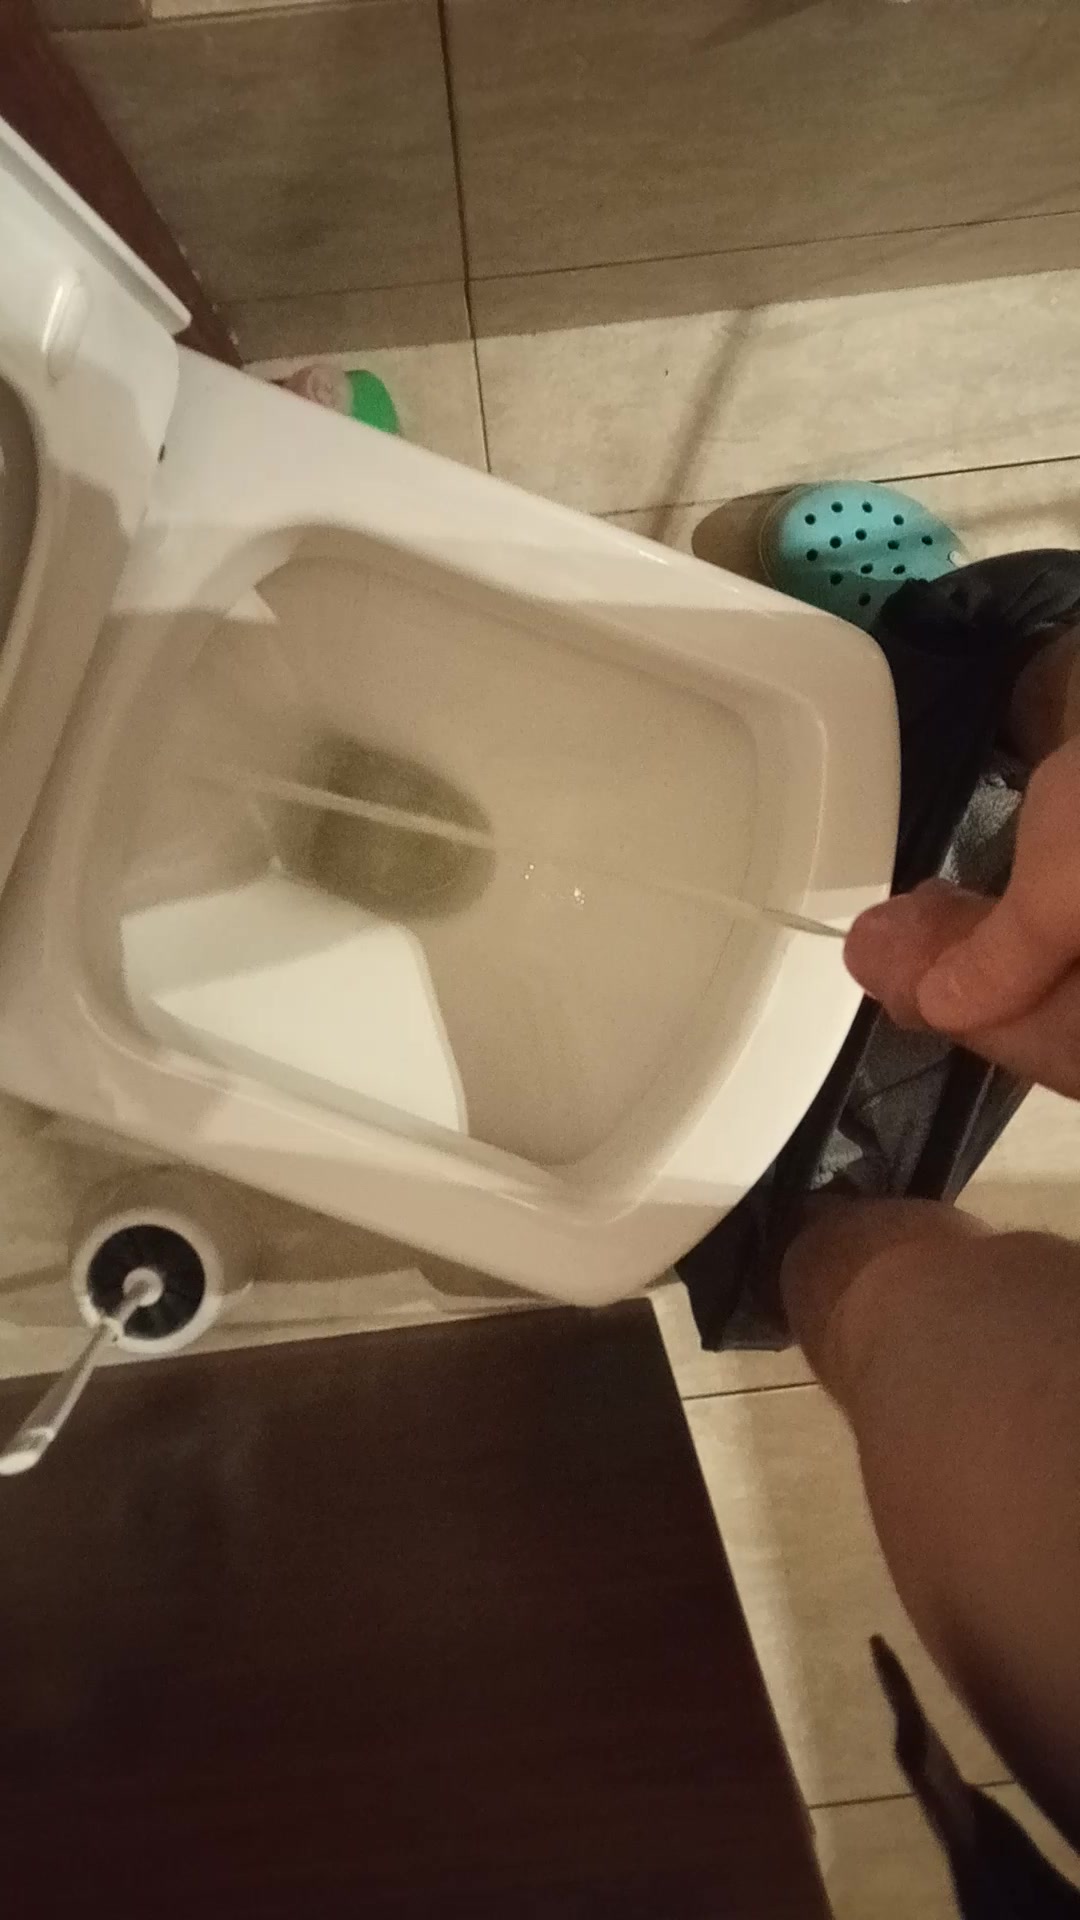 me pissing and wanking